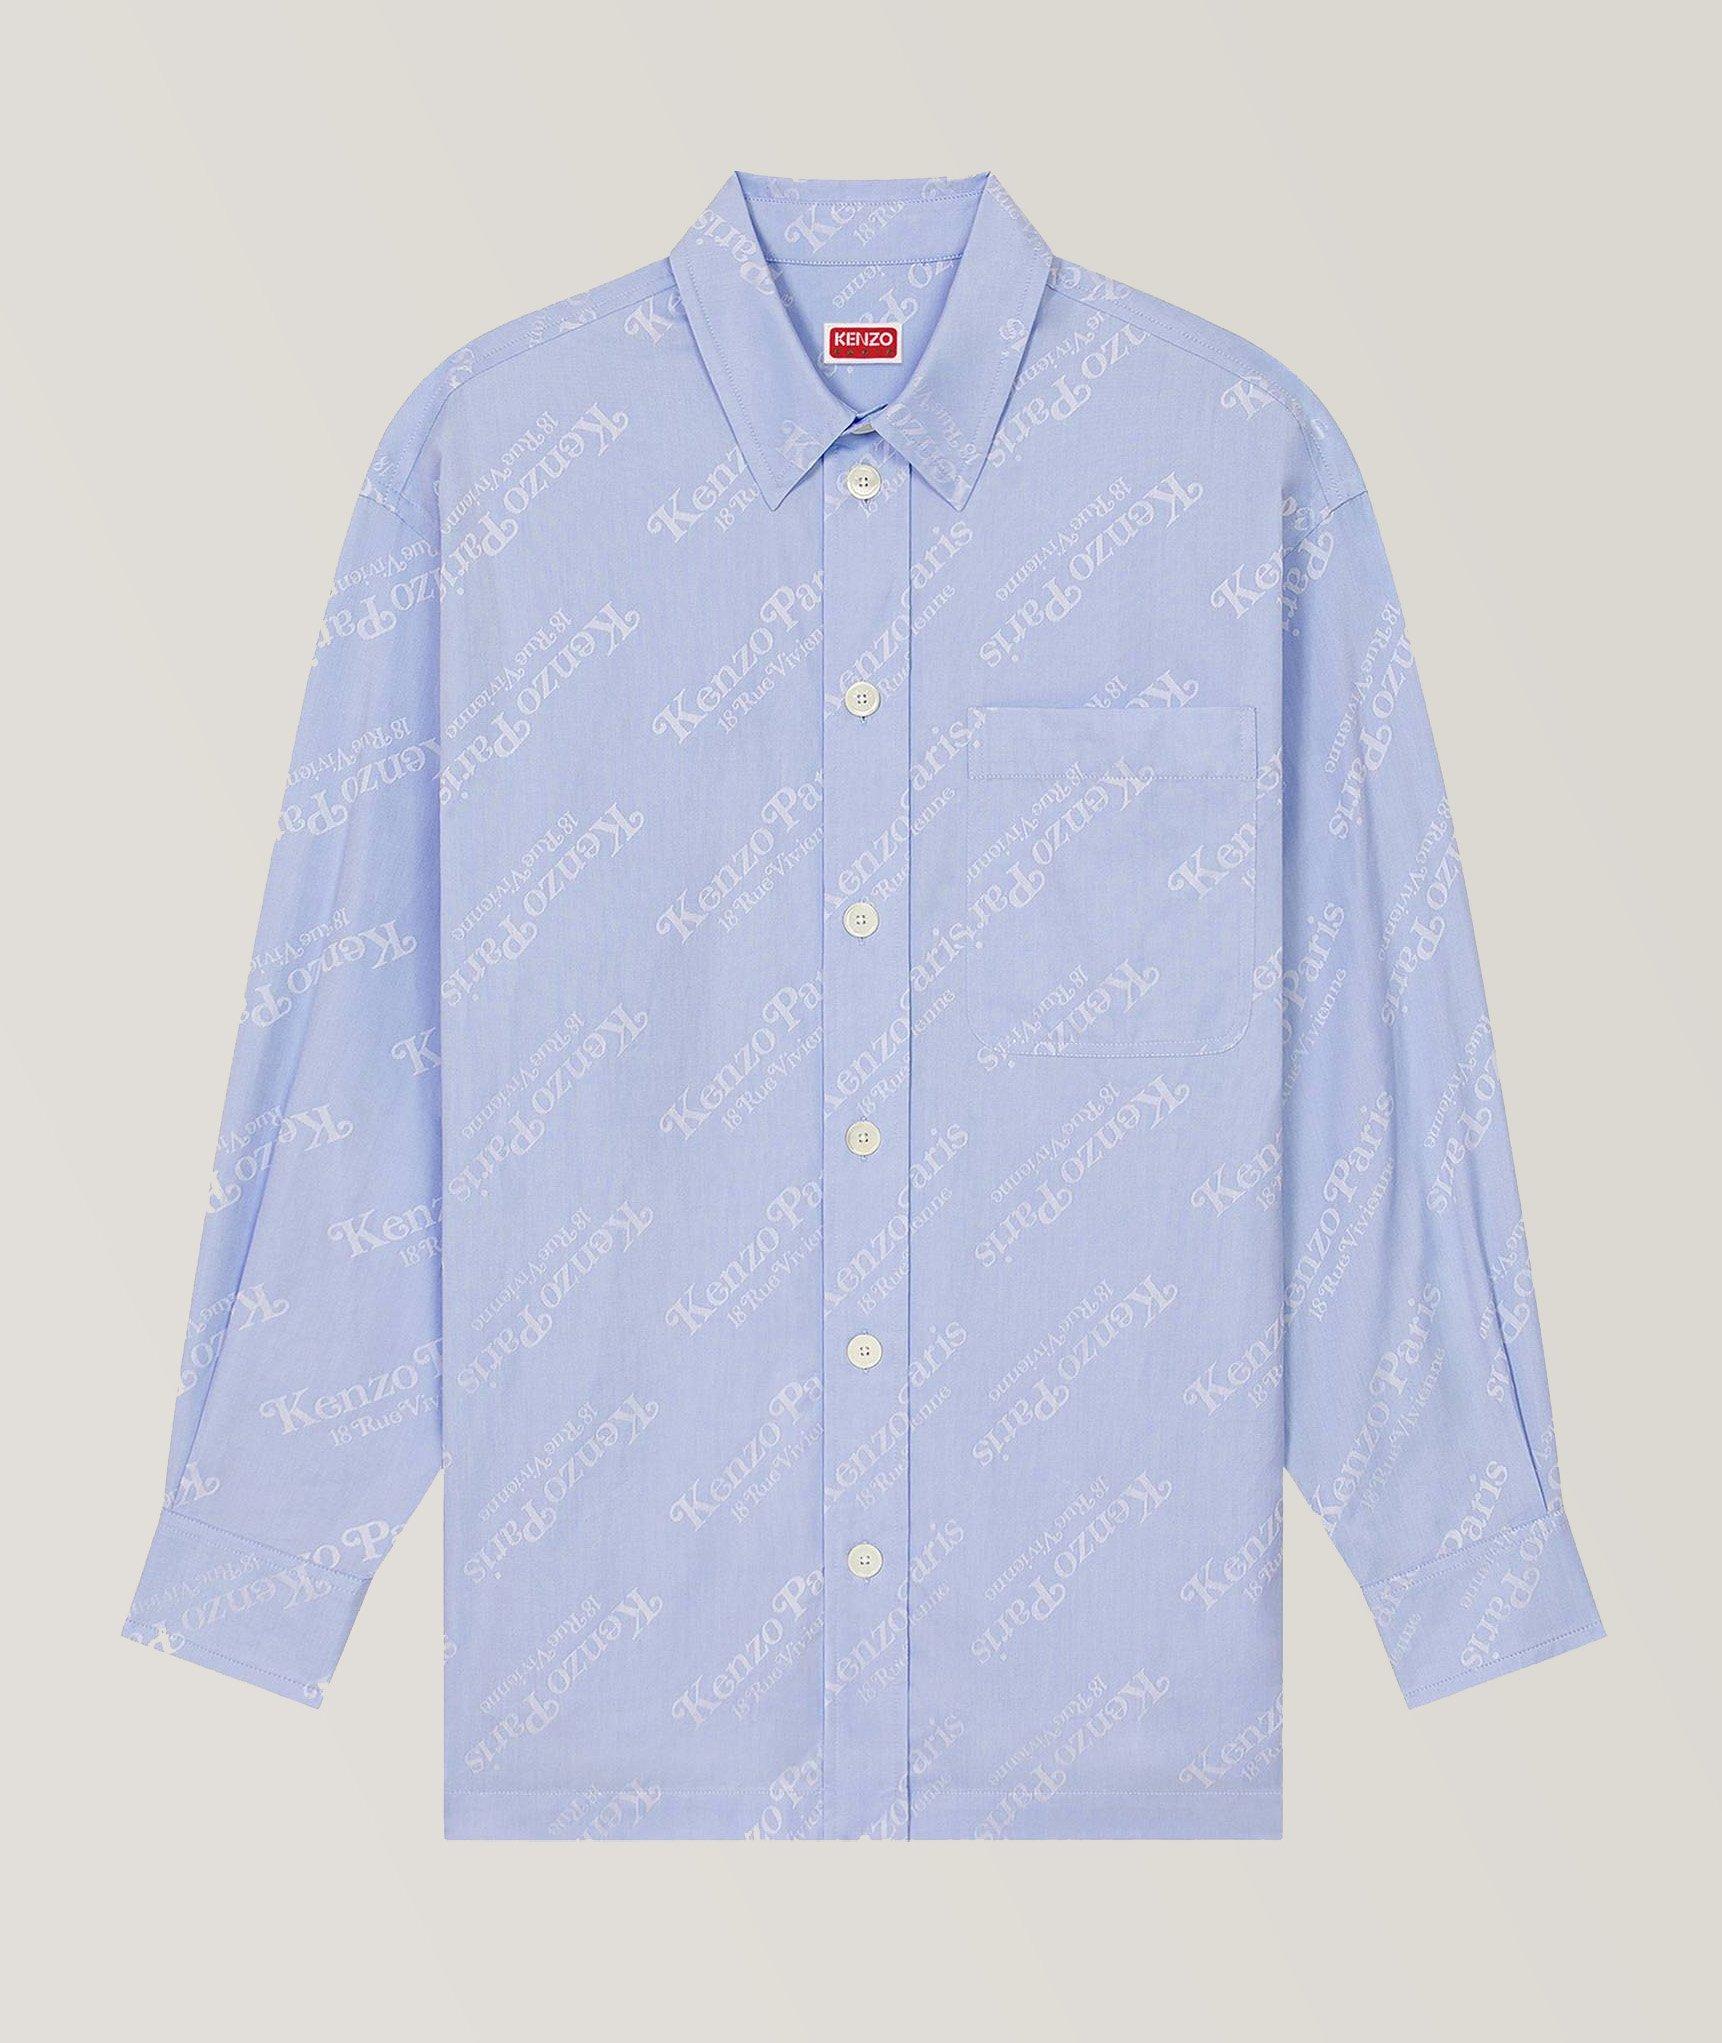 Kenzo Verdy Collaboration All-Over Logo Cotton Sport Shirt